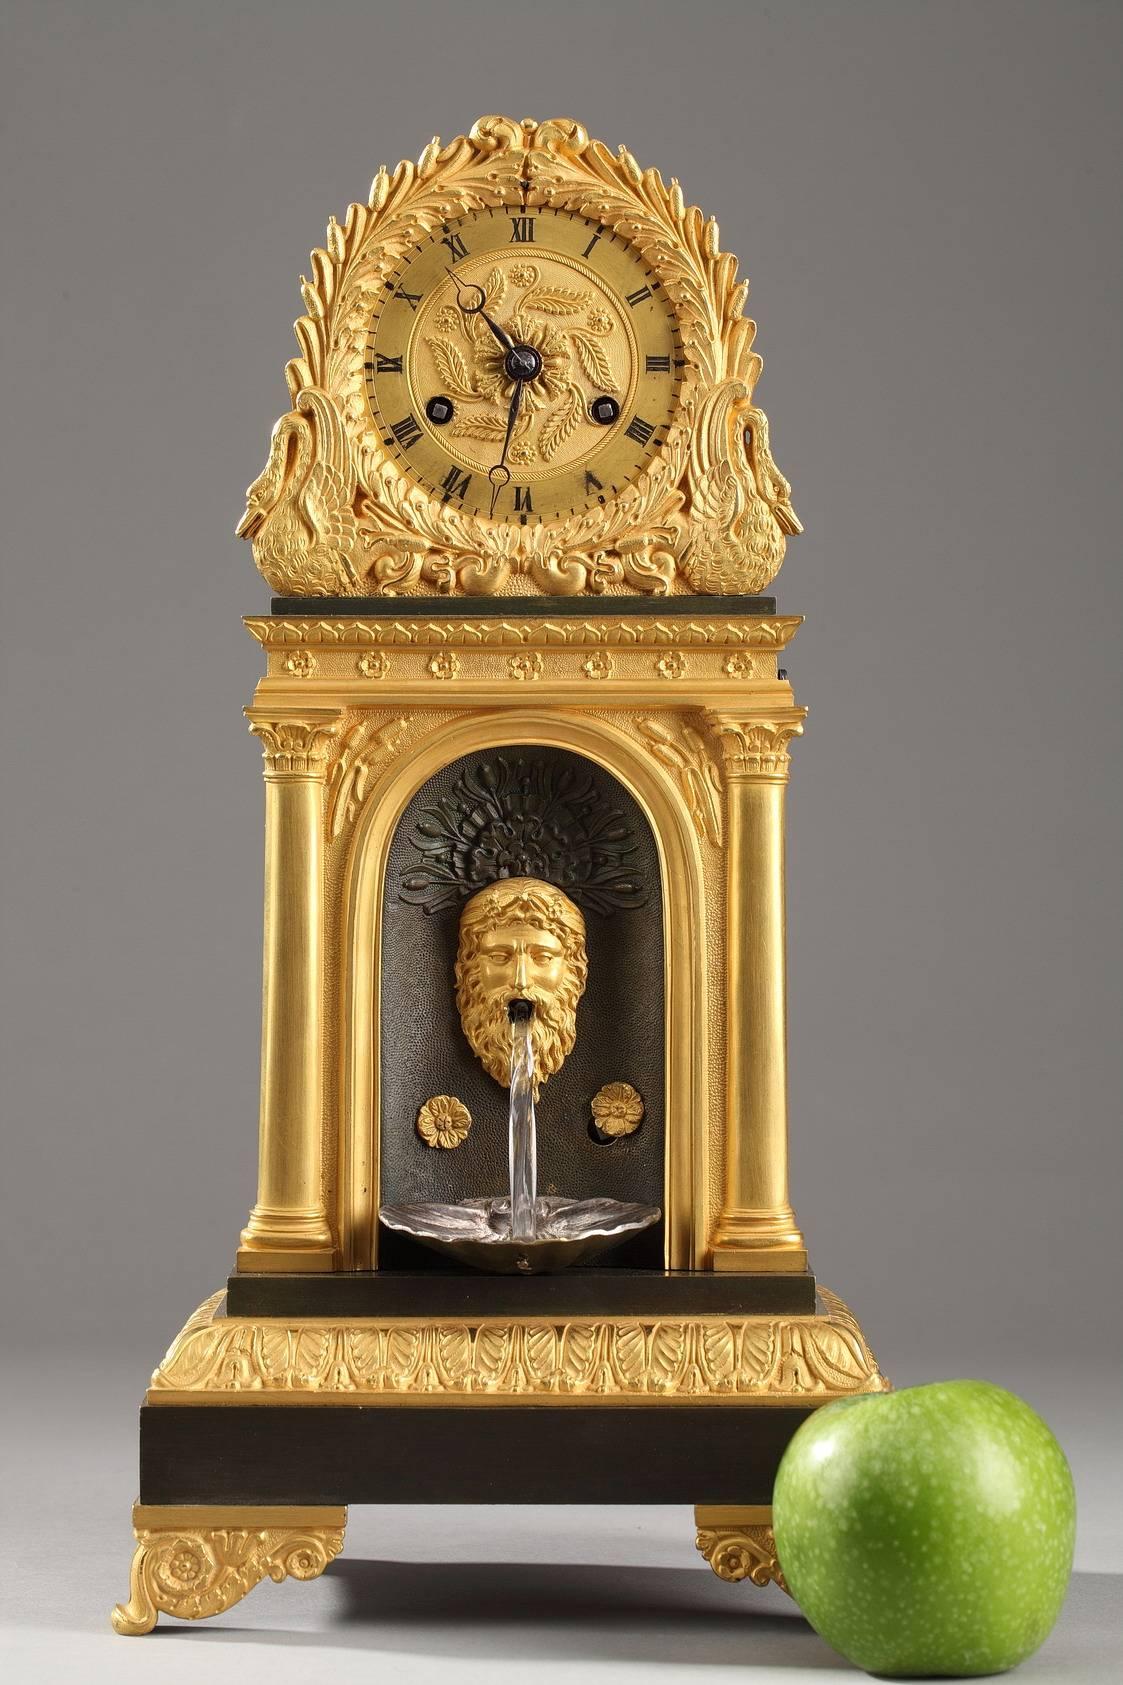 Gilt and patinated bronze mantel clock with a faux fountain. A niche under the clock face houses the face of a river god and a shell. A bar of crystal connects the open mouth of the face to the shell, creating the appearance of the flowing water of